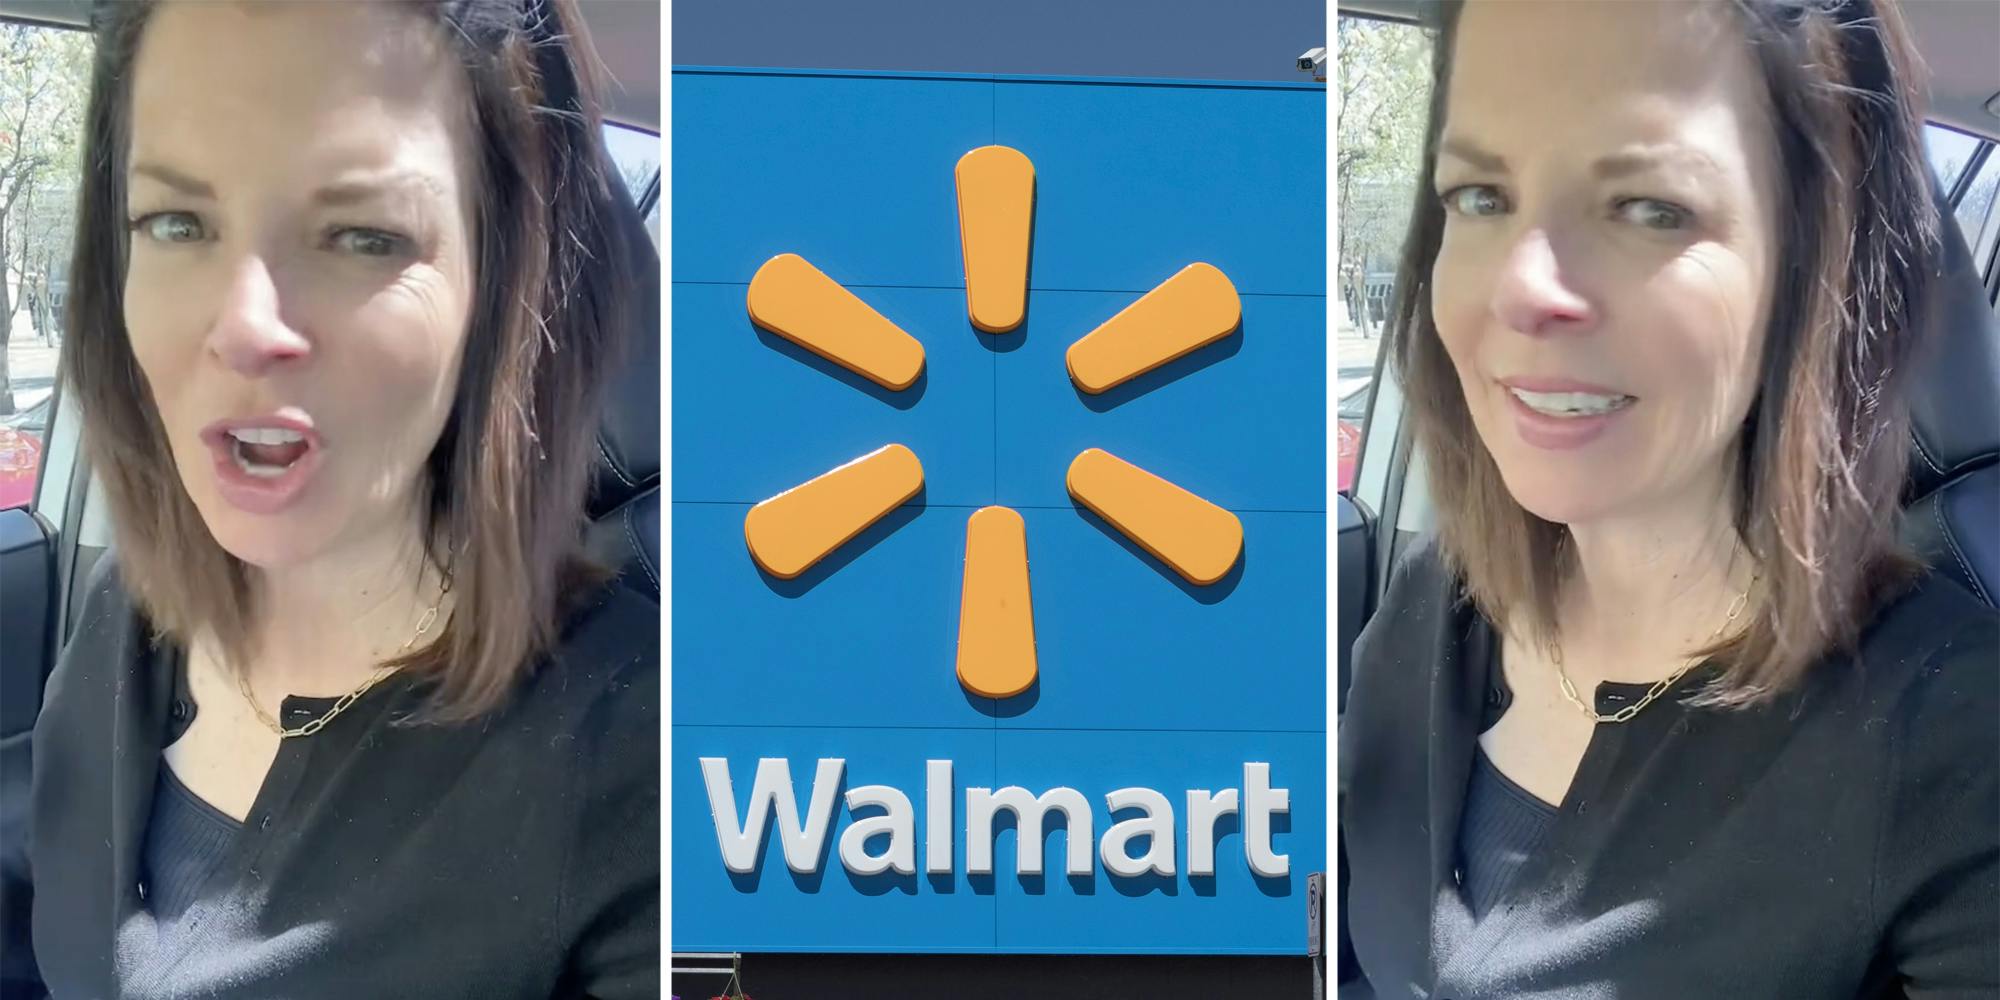 ‘It’s all a scam’: Woman shares why you should always round up when making purchases in-store after being asked at Walmart self-checkout. But there’s a catch